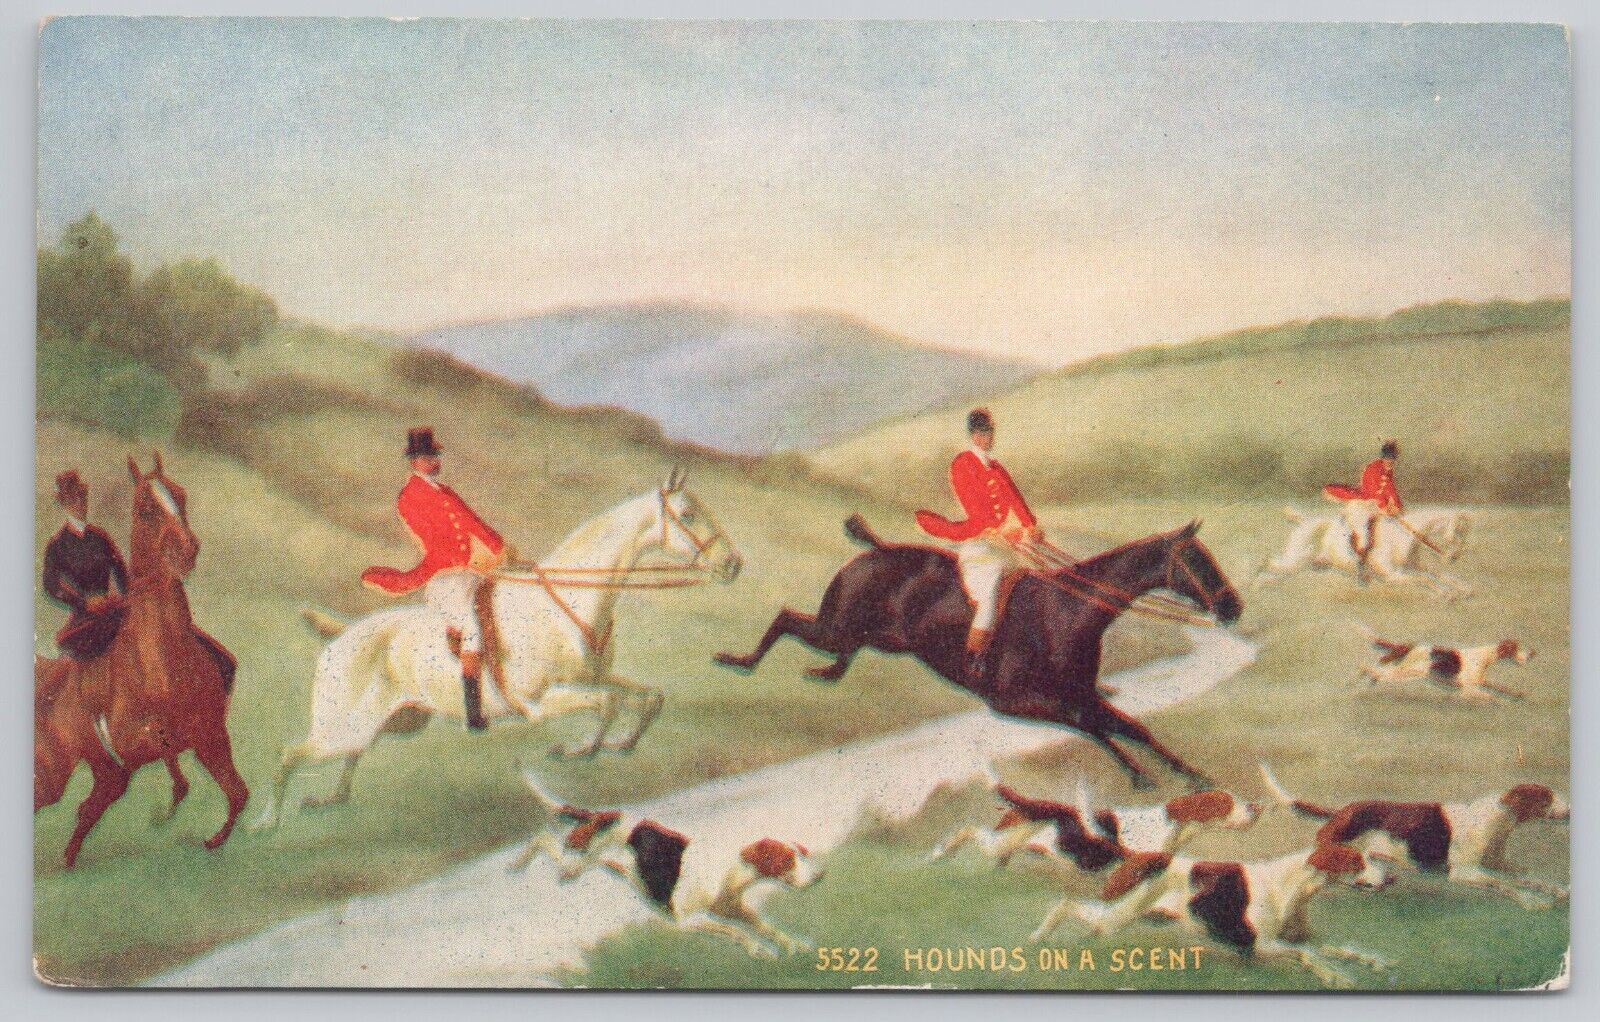 Hounds On A Scent Fox Hunt Vintage Lithograph Postcard